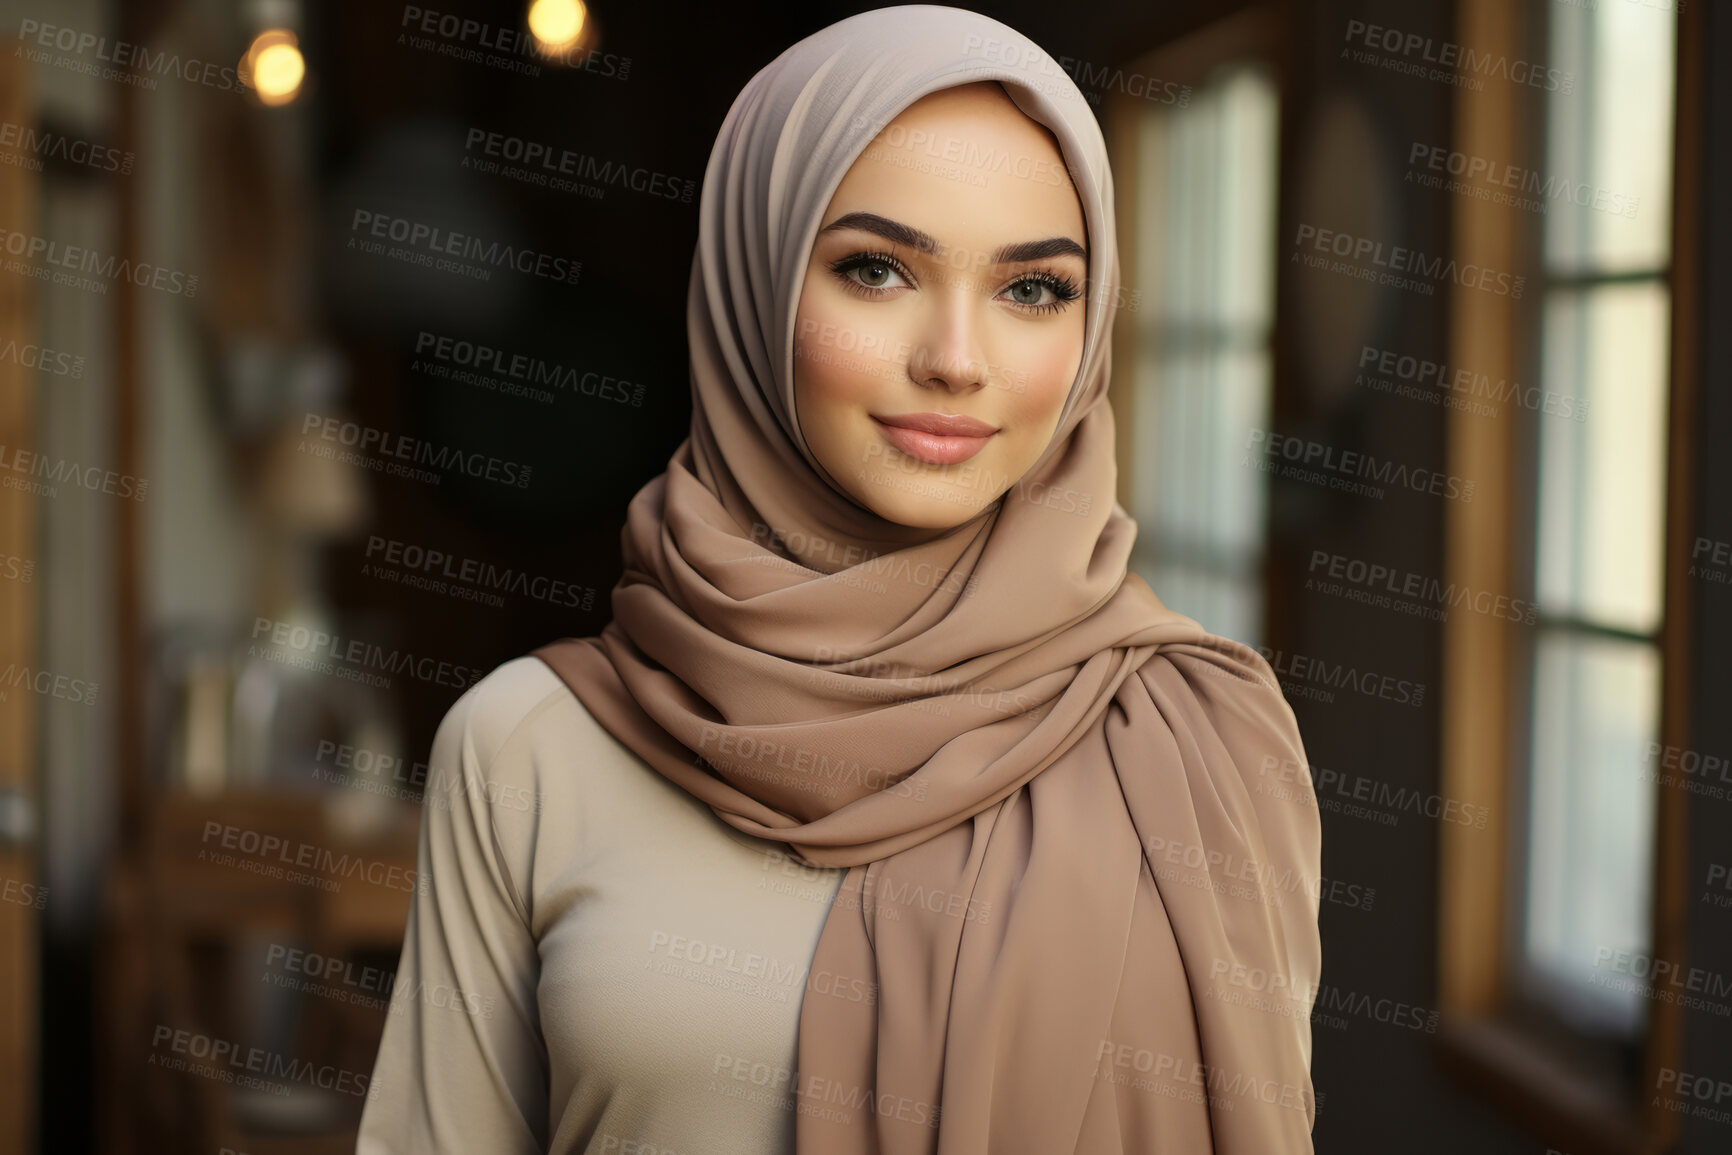 Buy stock photo Portrait of muslim woman posing in home. Wearing hijab. Religion concept.